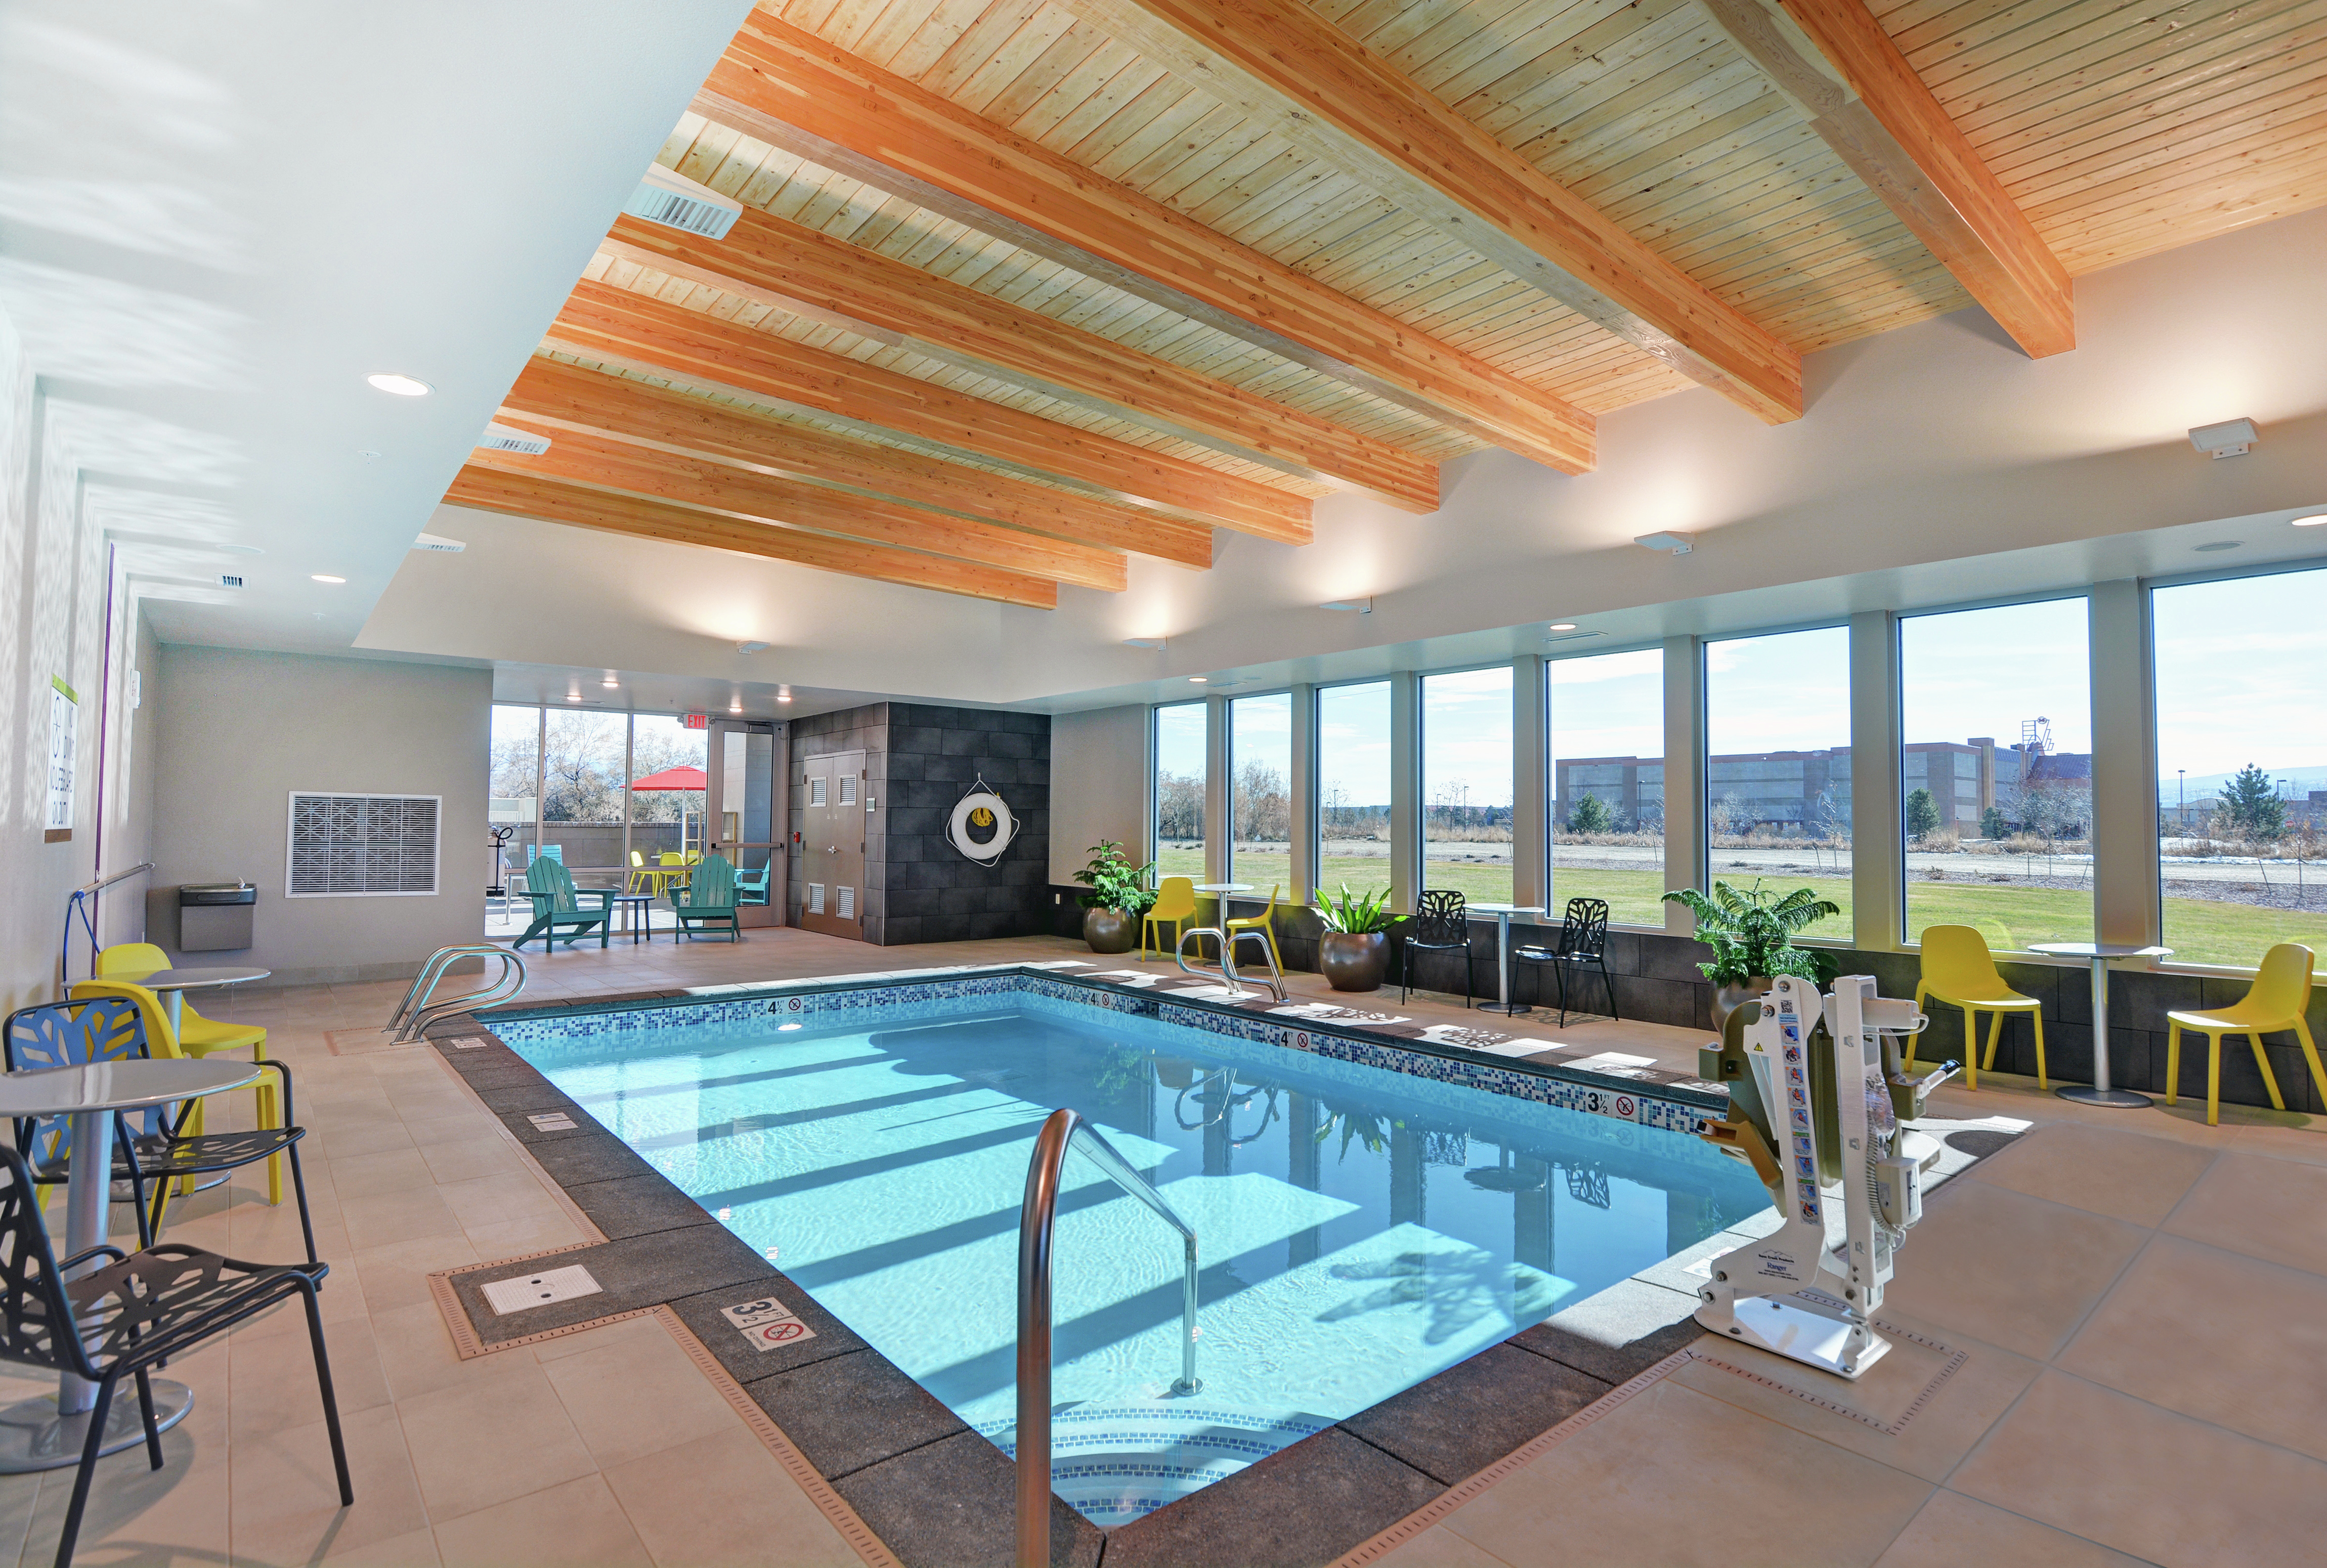 Indoor Pool and Lounge Area